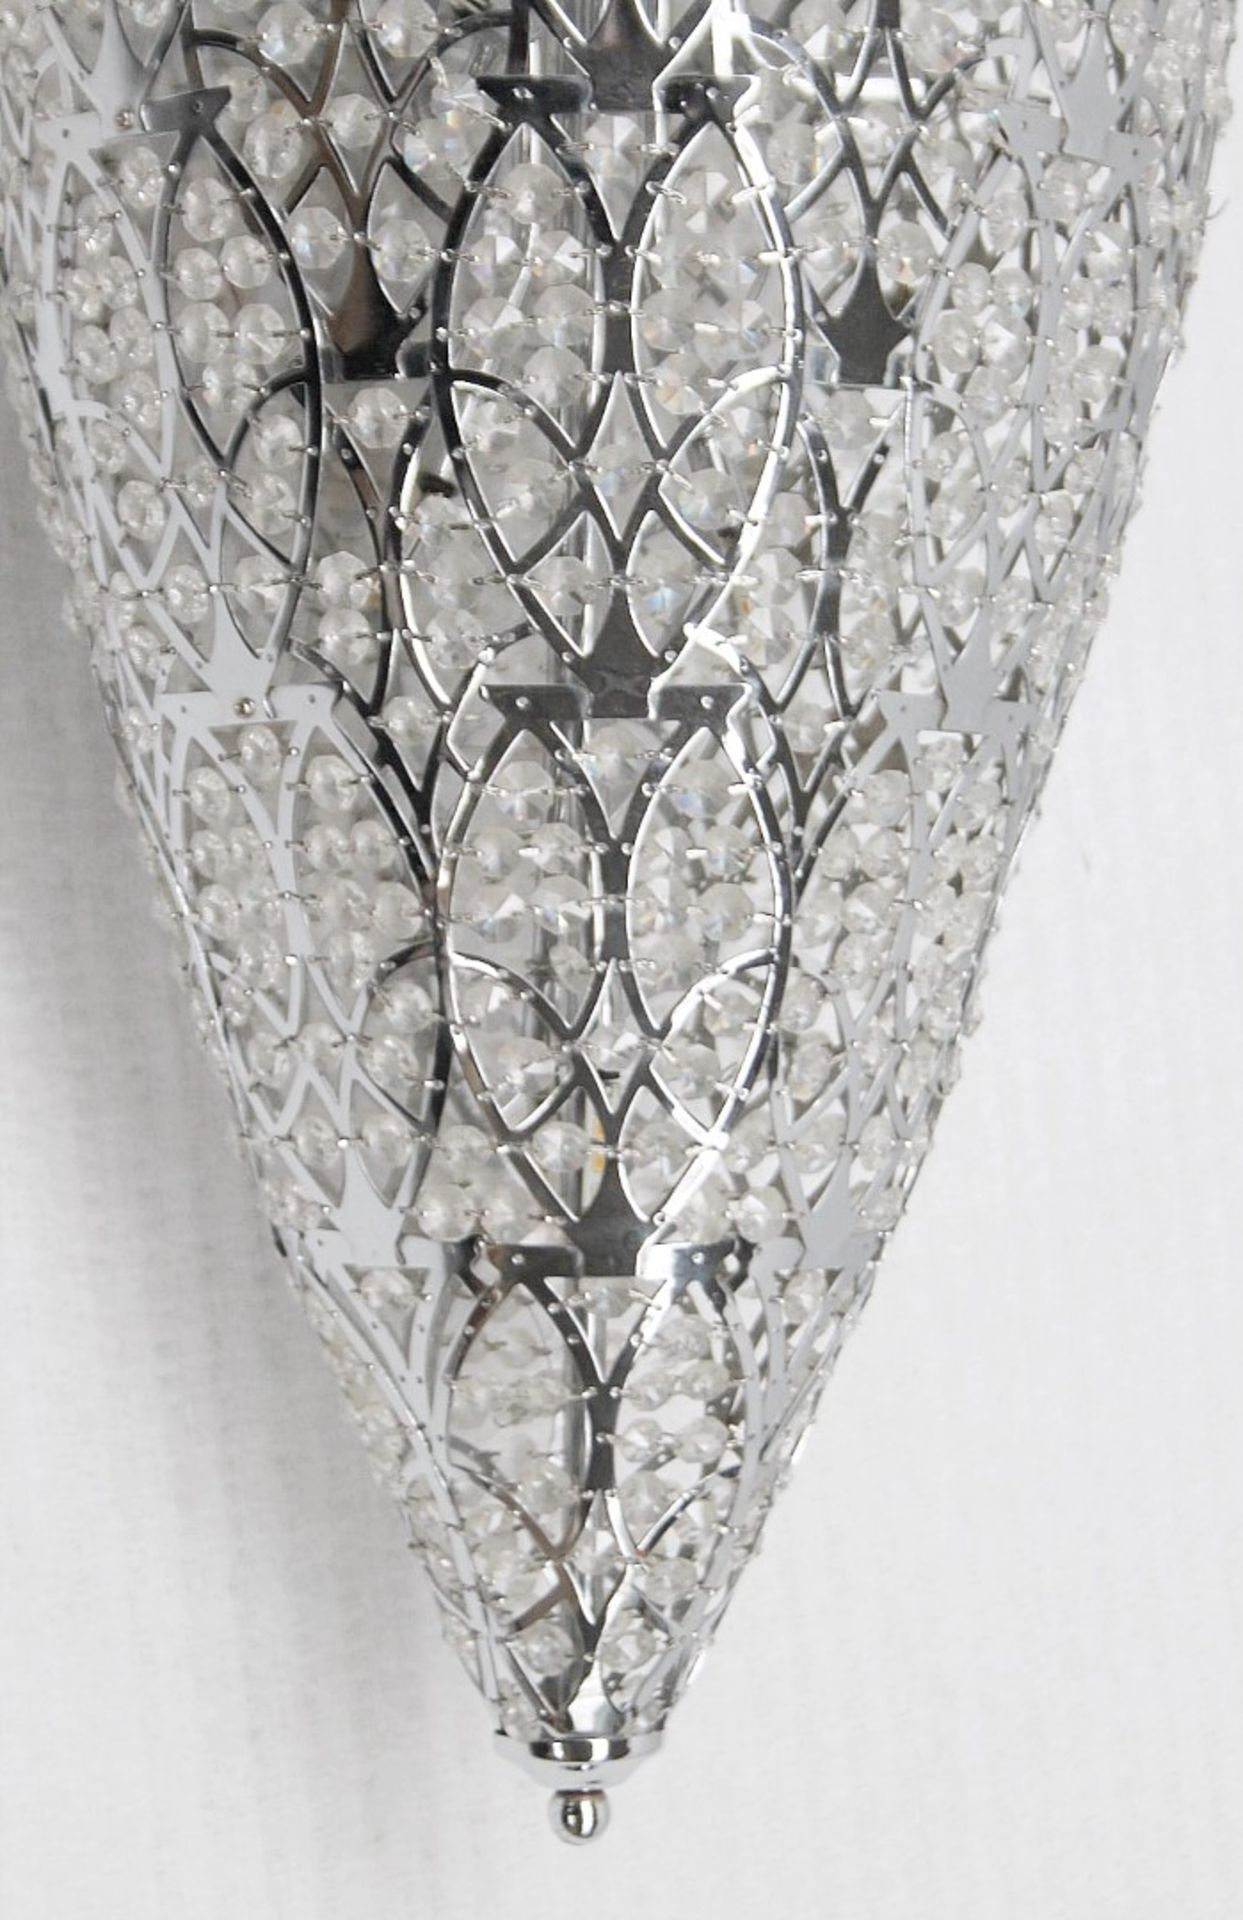 1 x High-end Italian LED Light Fitting Encrusted In Premium ASFOUR Crystal Elements - Approximate - Image 5 of 8